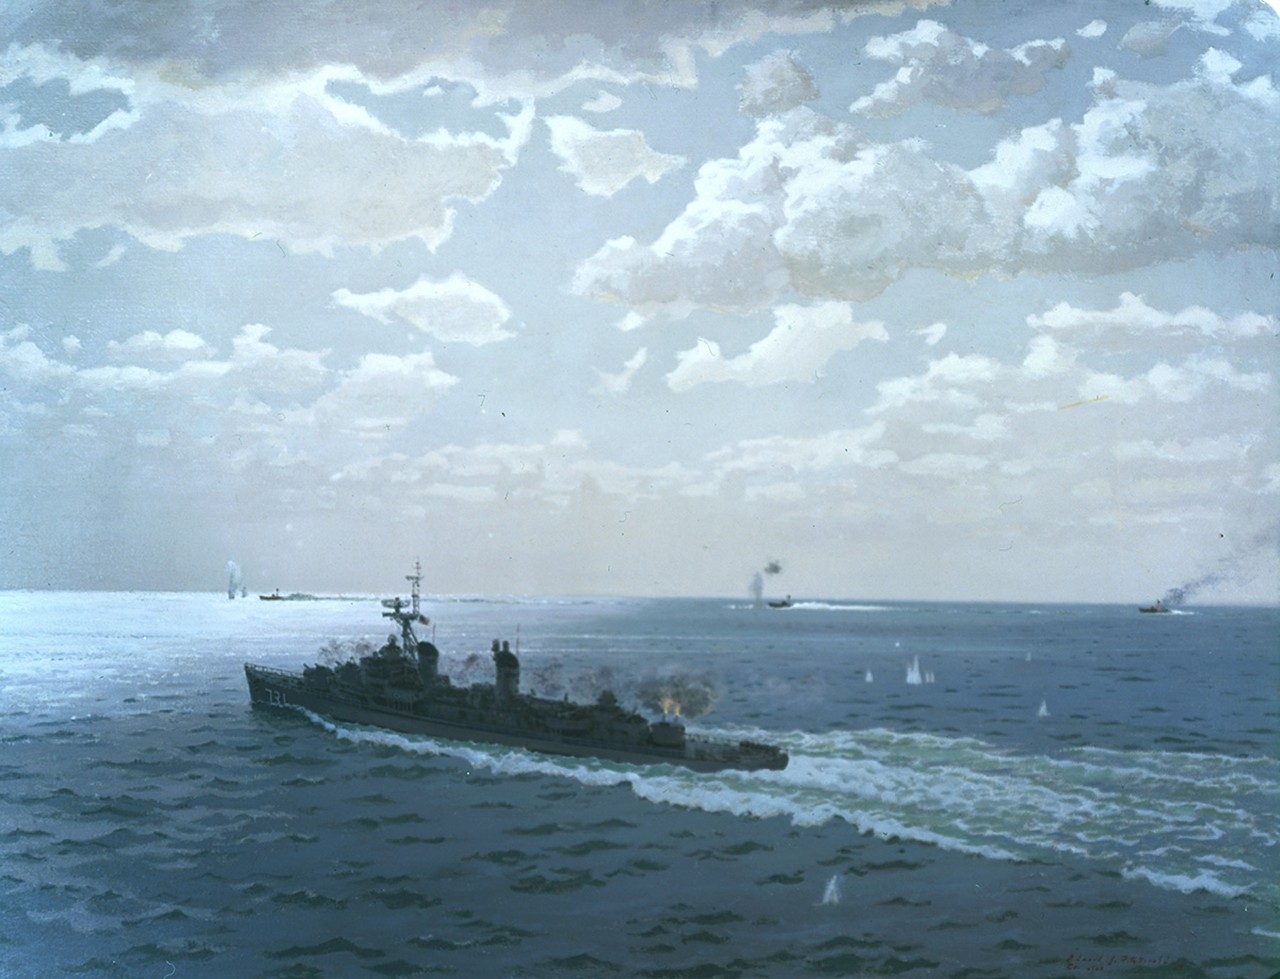 Painting of the Gulf of Tonkin incident